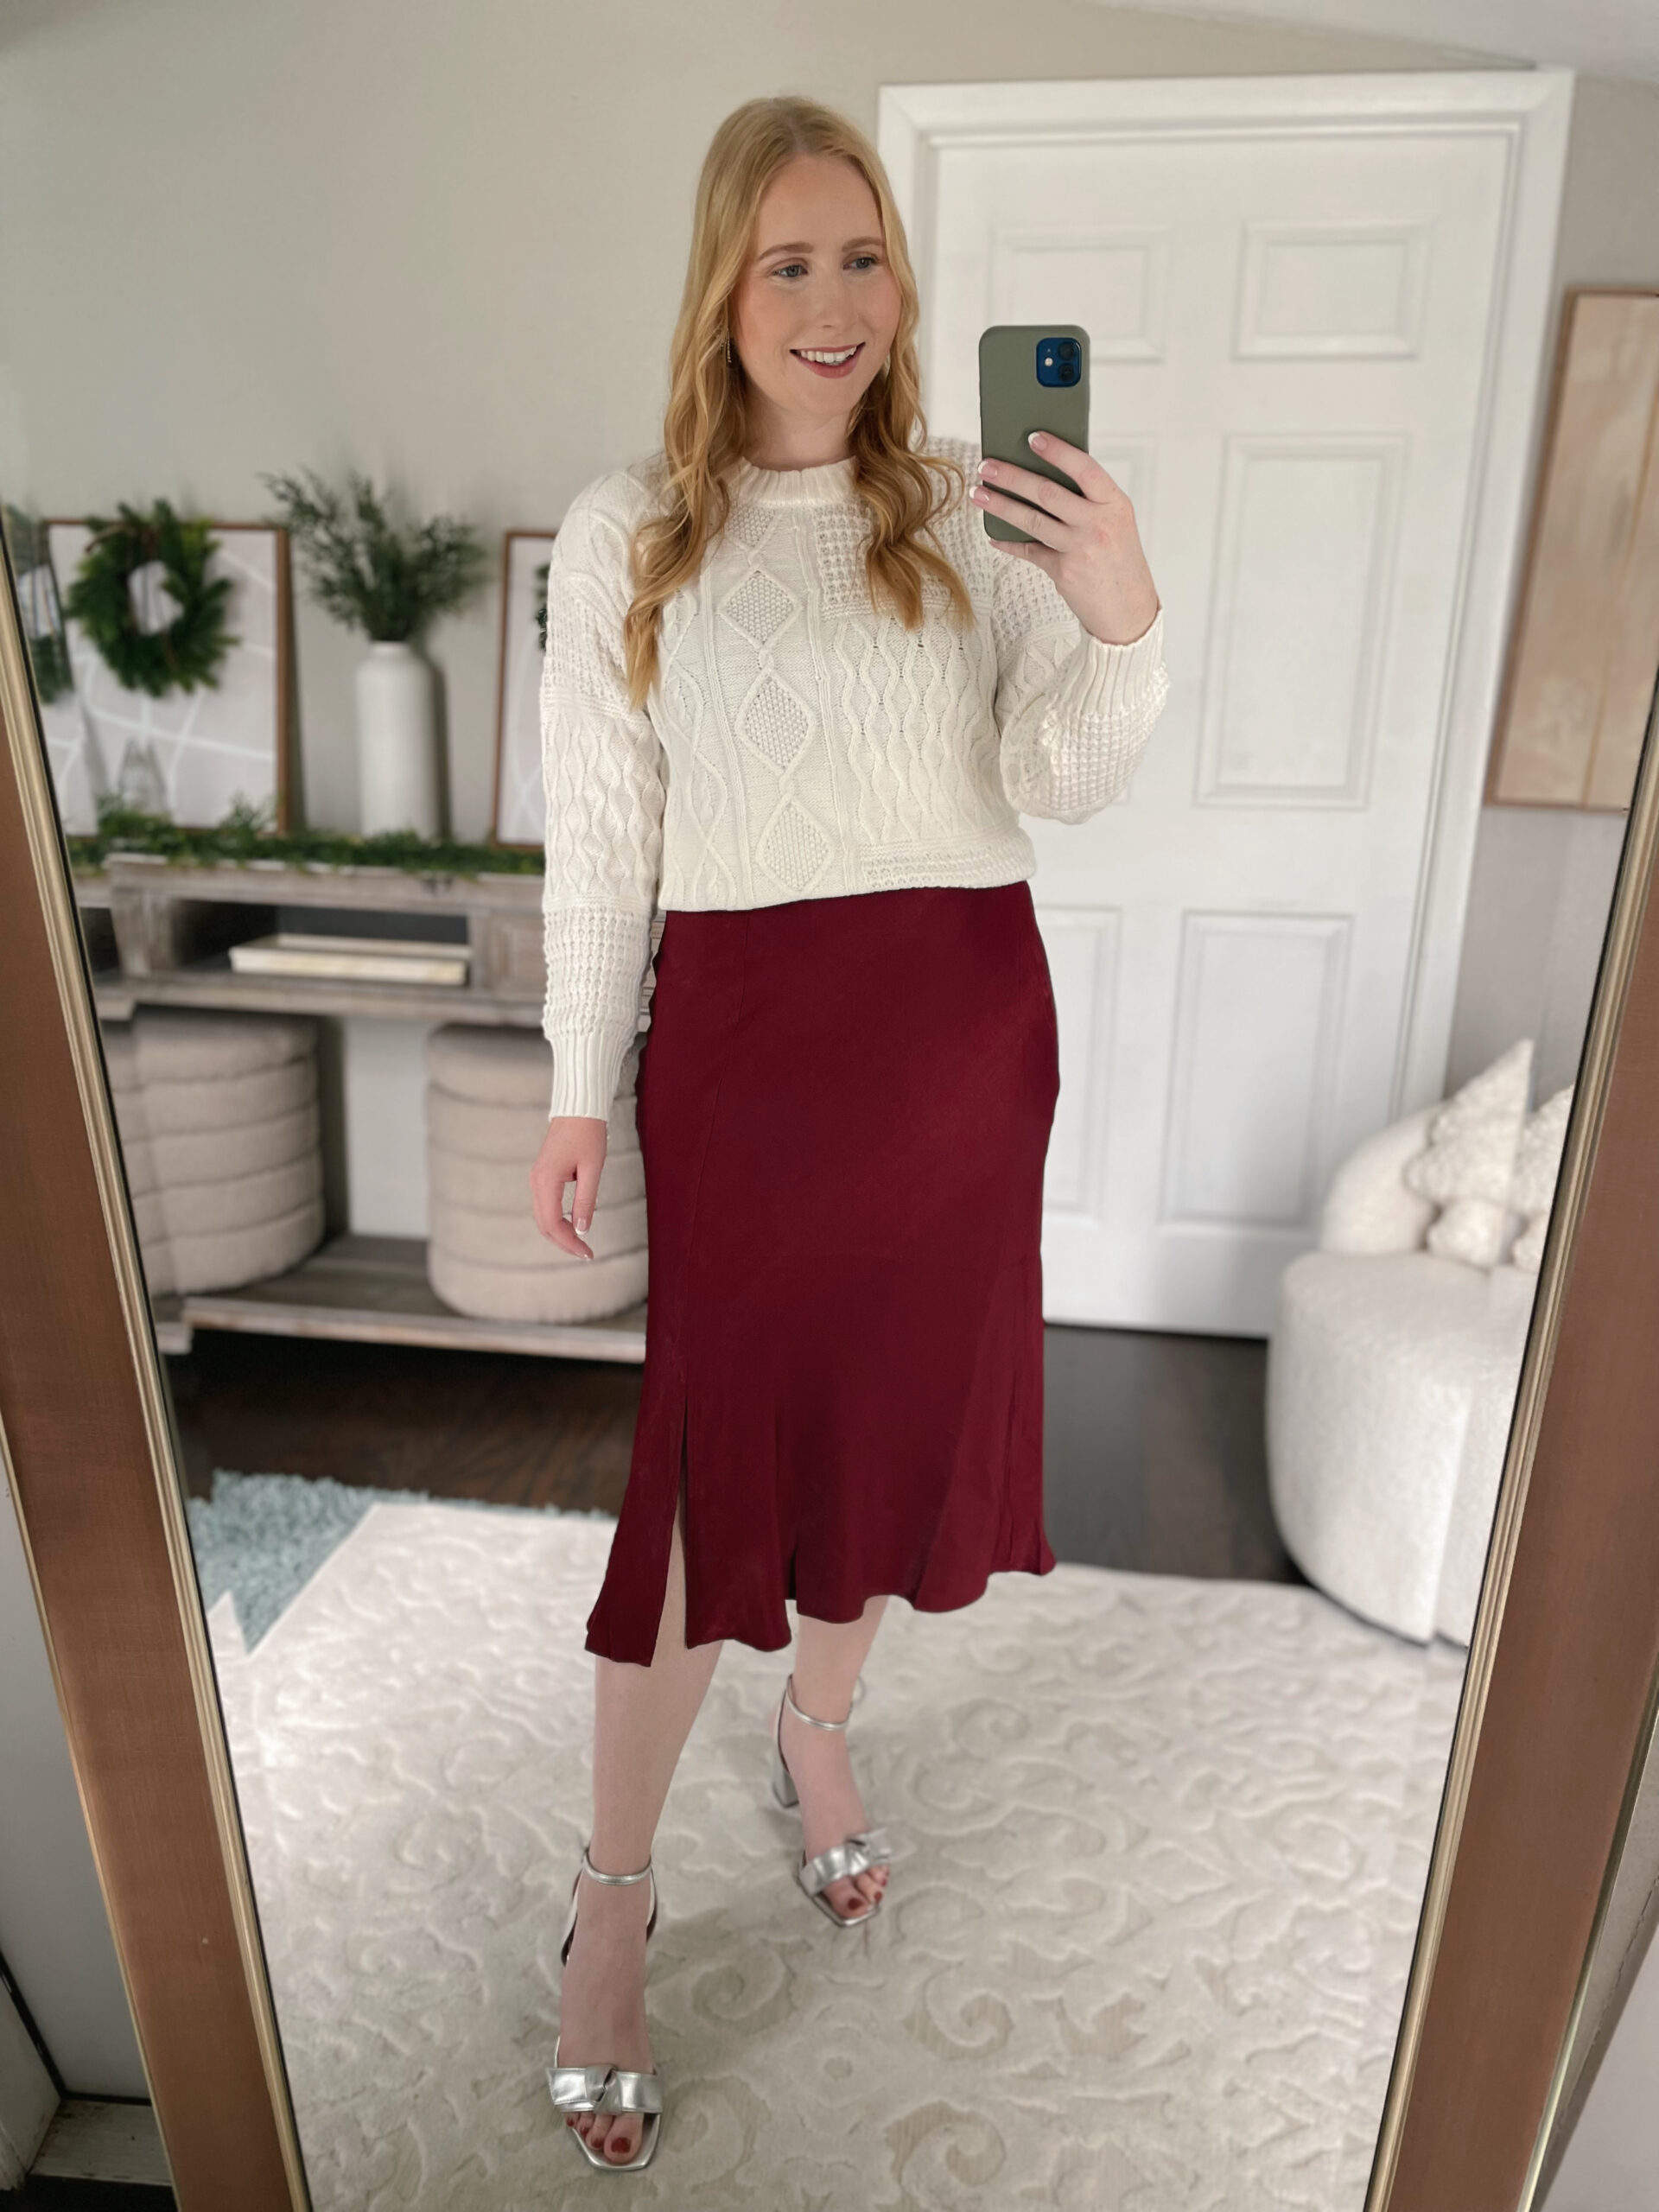 Cable knit sweater with a red midi skirt